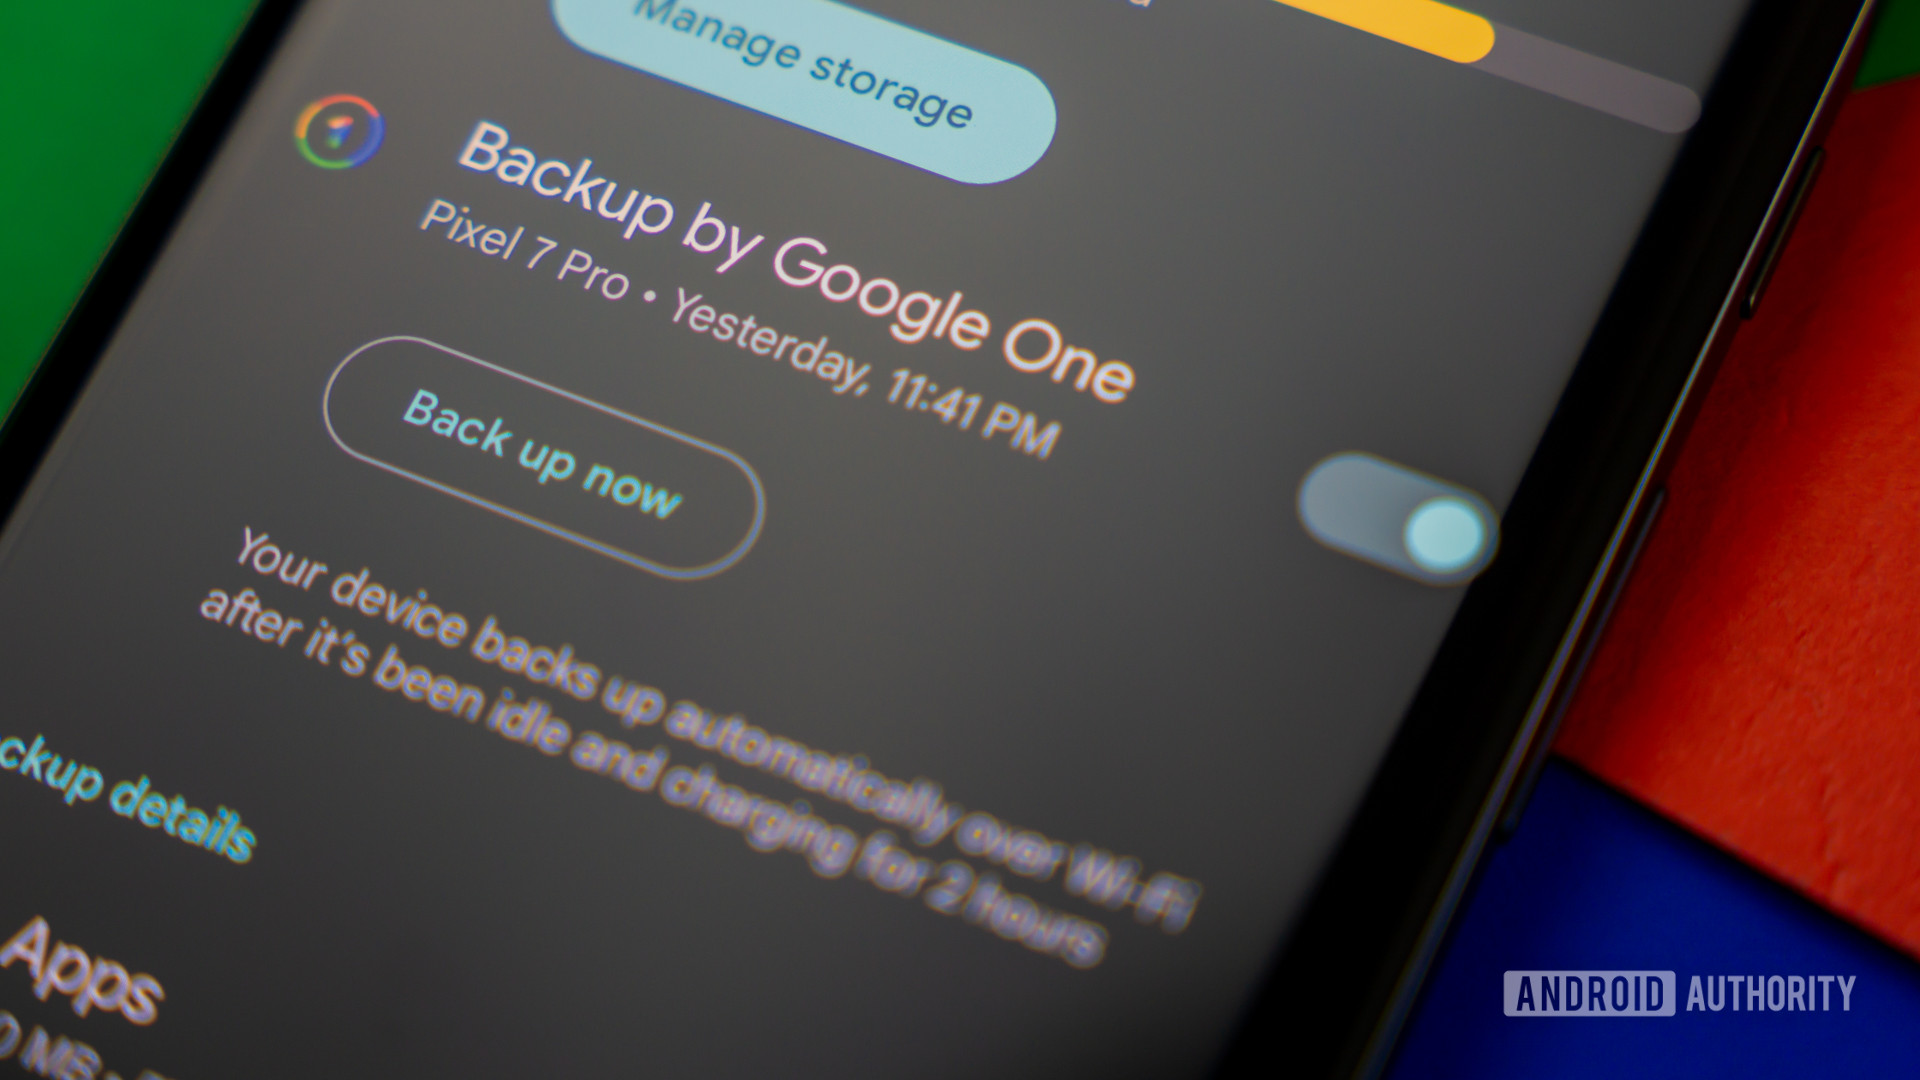 Backup by Google one settings page on smartphone Stock photo 2